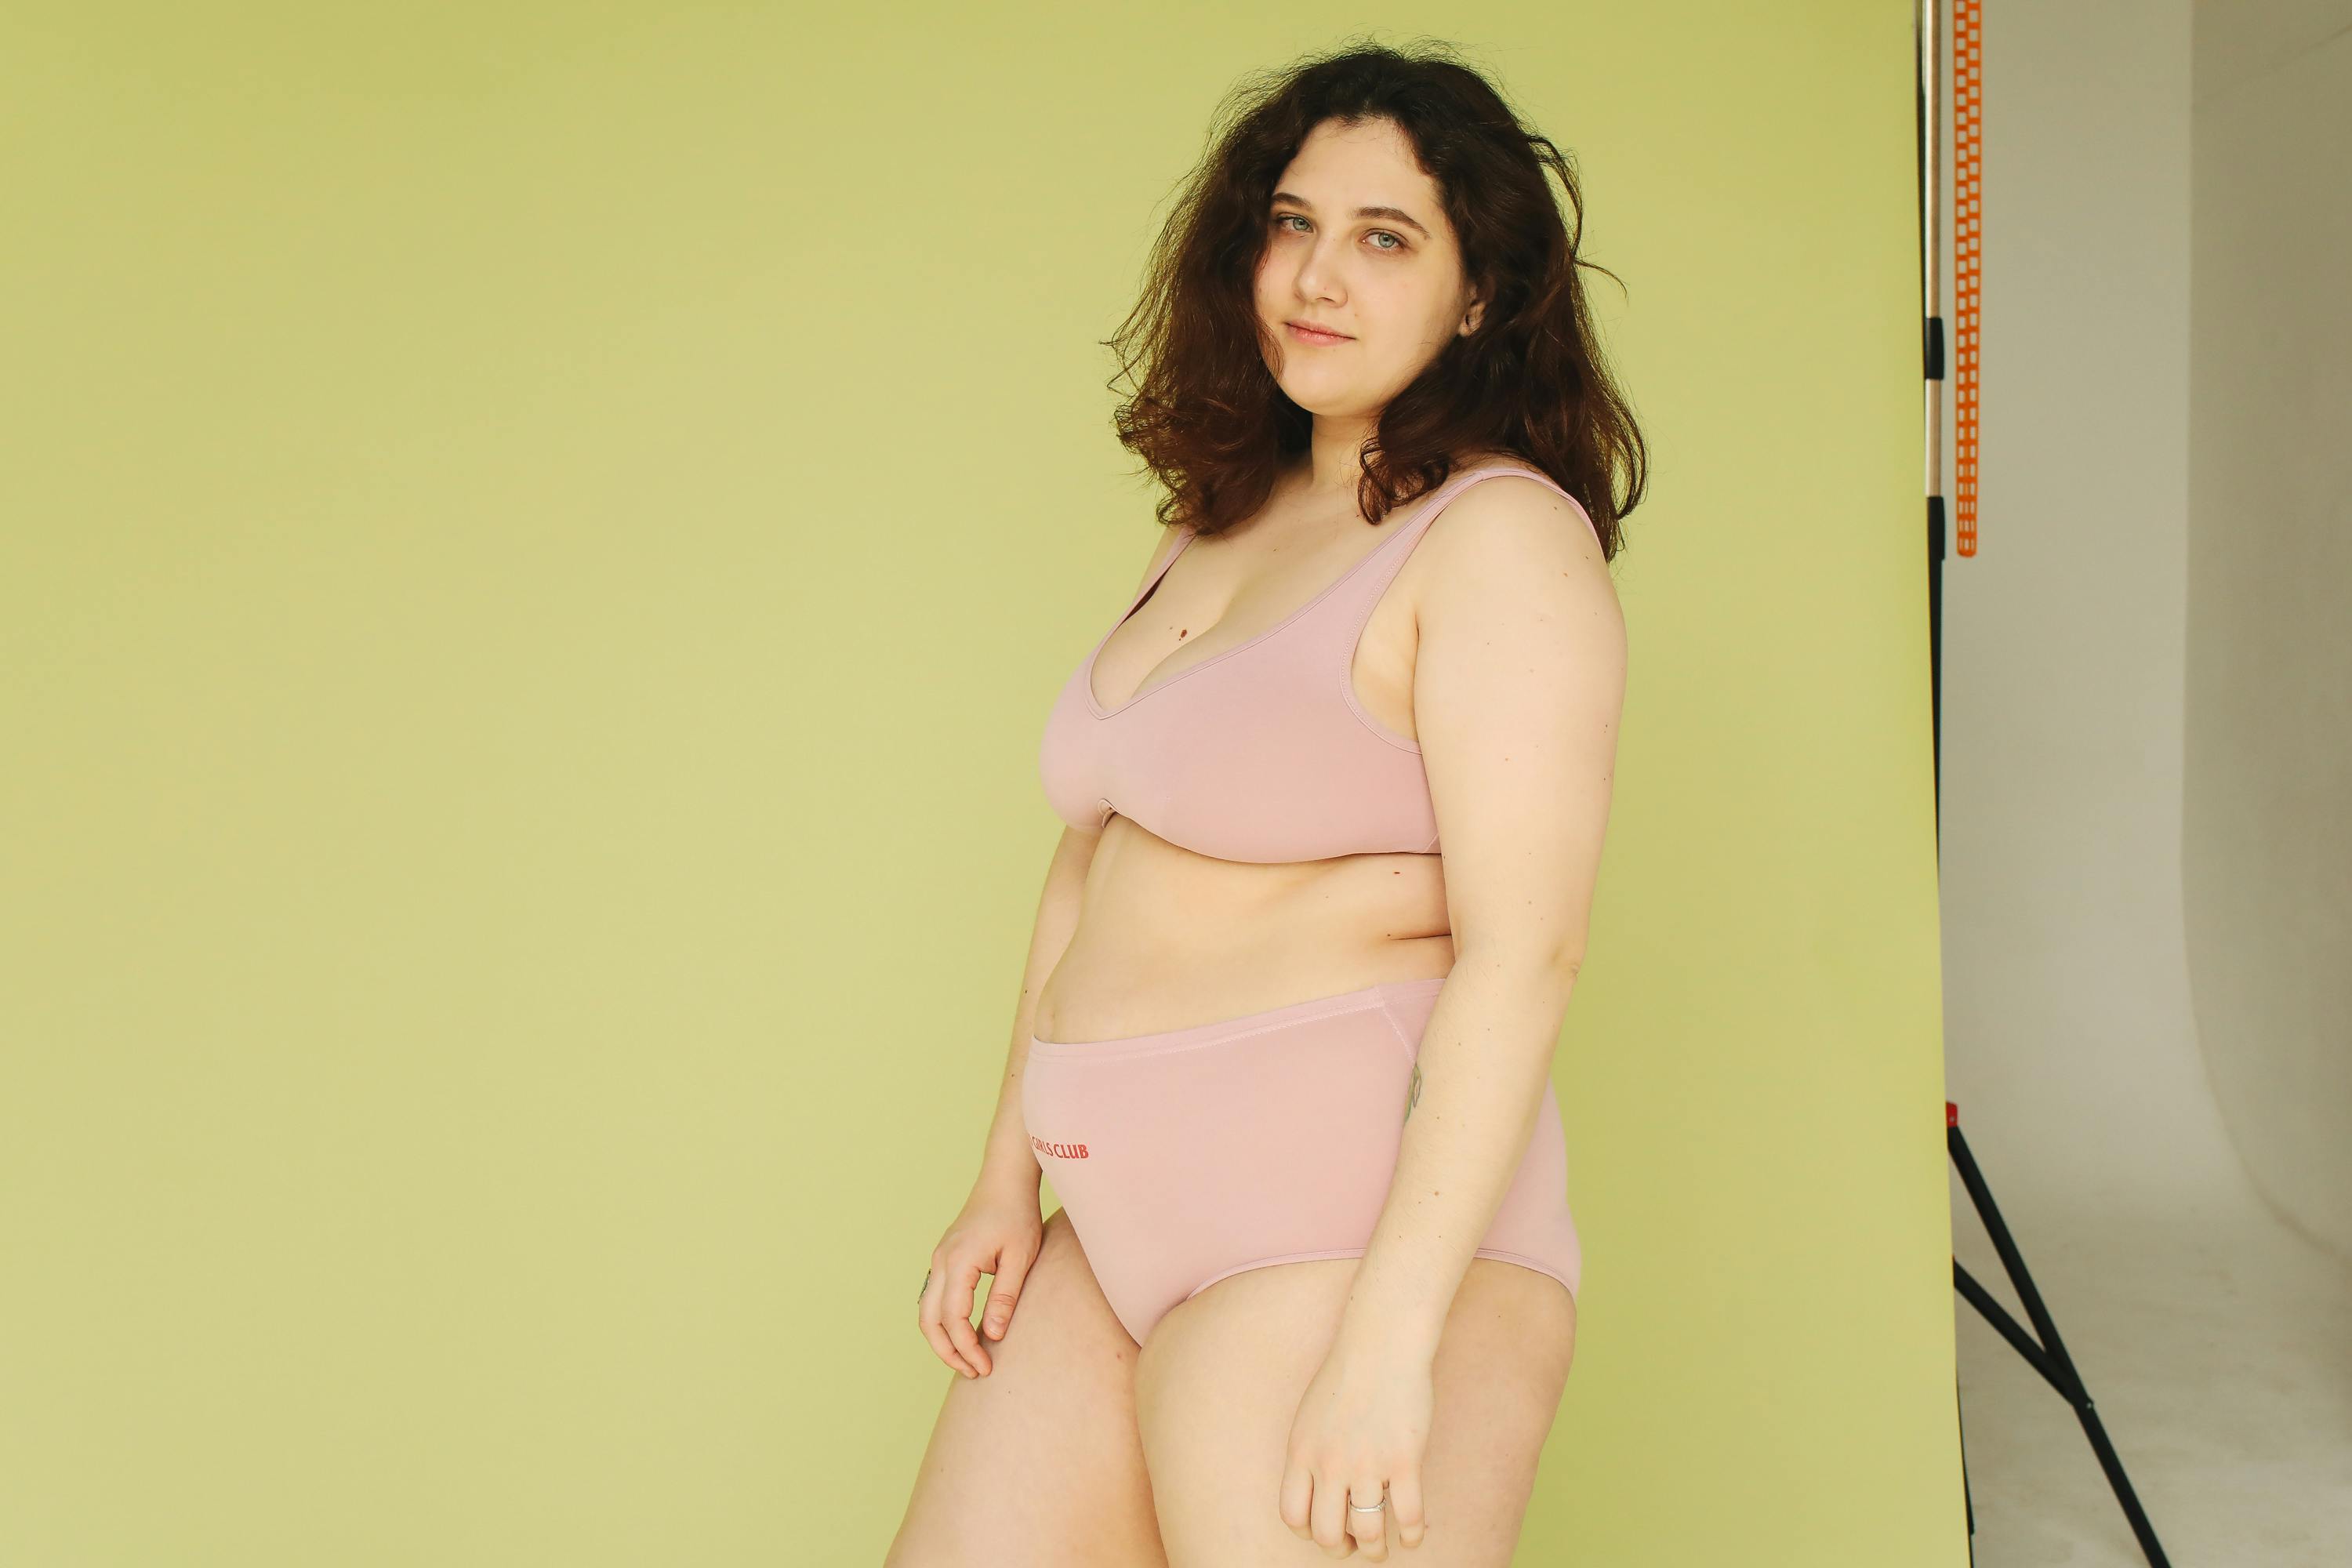 A Beautiful Chubby Woman Wearing Pink Underwear while Looking at the Camera  · Free Stock Photo